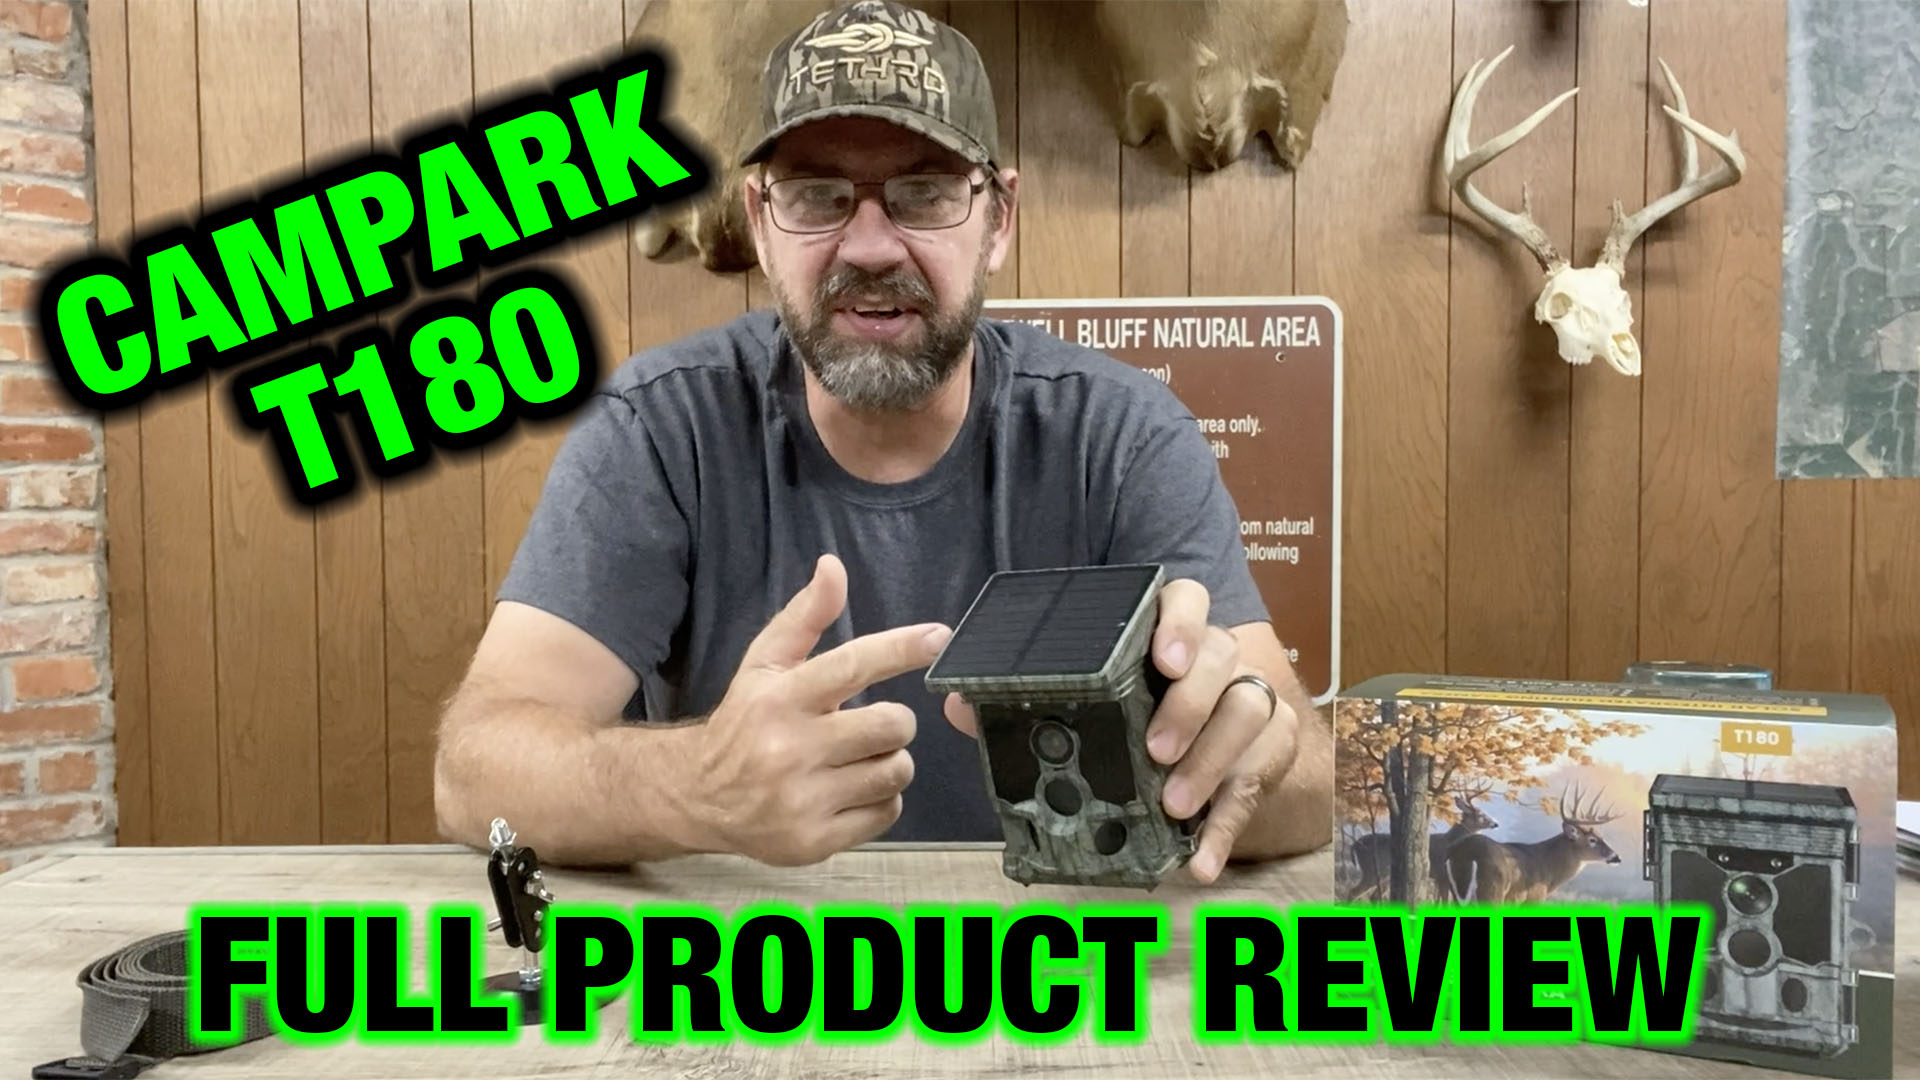 Image of the author holding a Campark T180 trail camera for this product review.